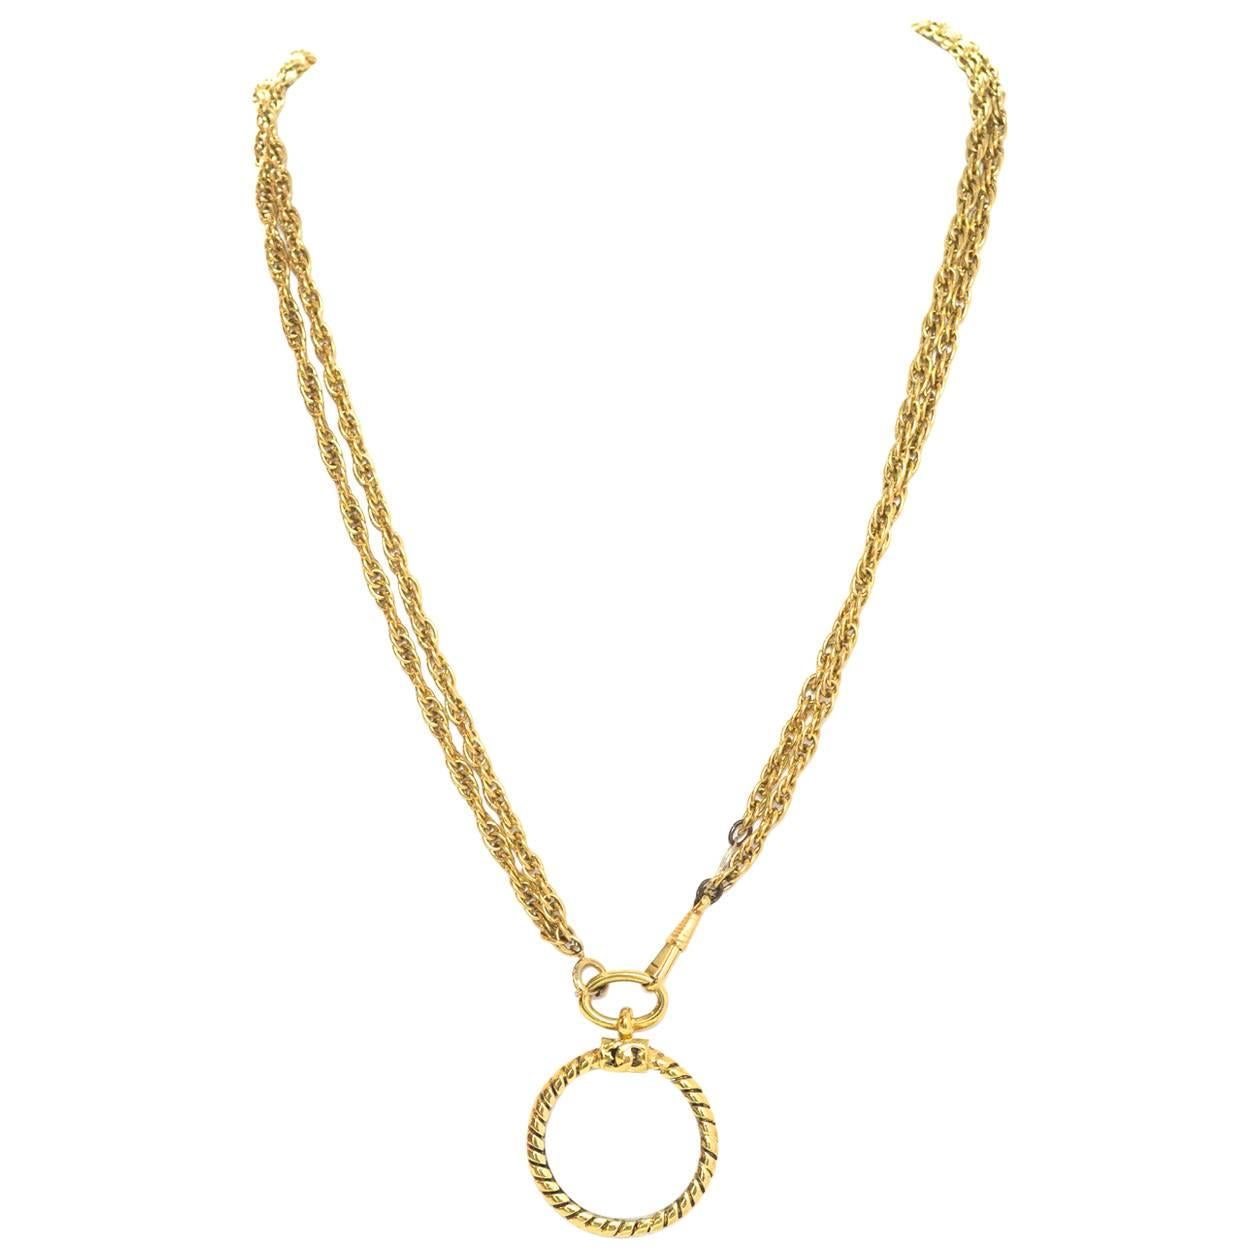 Chanel Vintage Gold Double Chain Magnifying Glass Pendant Necklace
Made In: France
Year of Production: 1982
Color: Goldtone
Materials: Metal and glass
Closure: Jump ring closure
Stamp: Chanel CC 1982 Made in France
Overall Condition: Very good